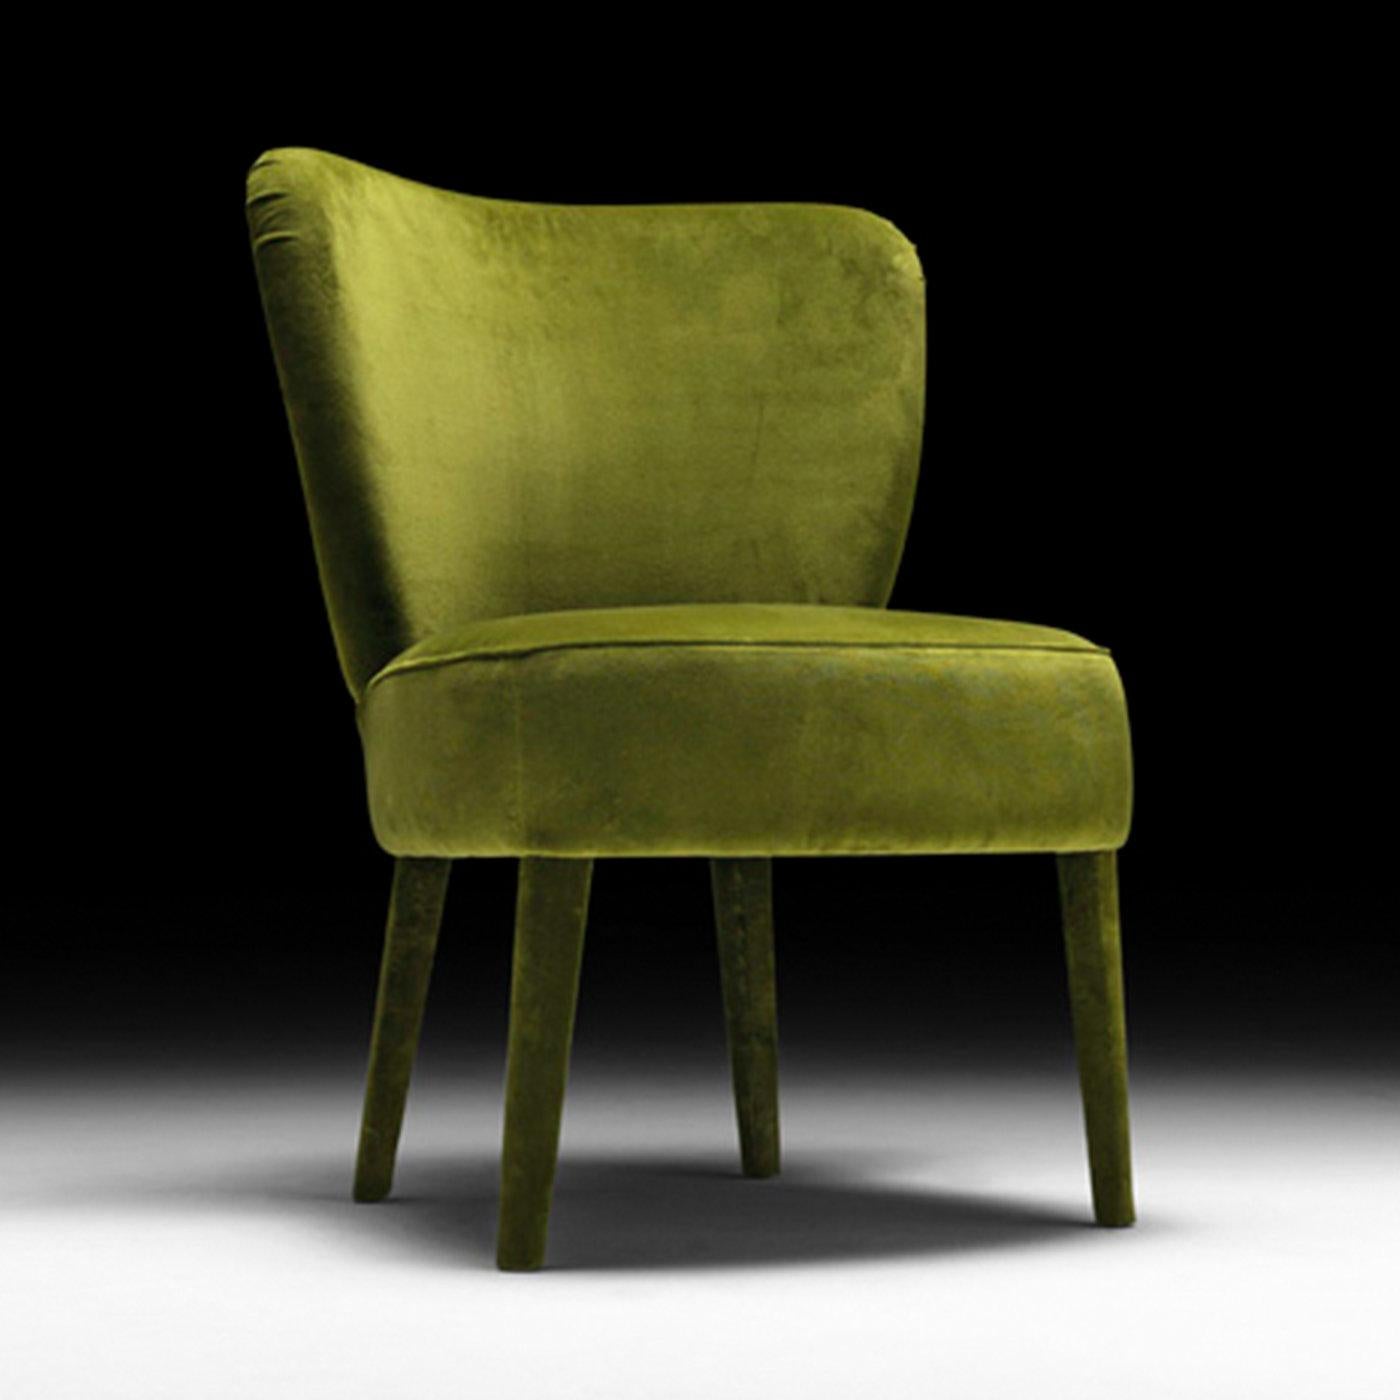 The elegant silhouette of this chair exudes comfort and relaxation. Resting on a beechwood structure, the seat and back are fashioned of fire-resistant polyurethane. The whole chair, including the feet, is covered with a captivating green fabric